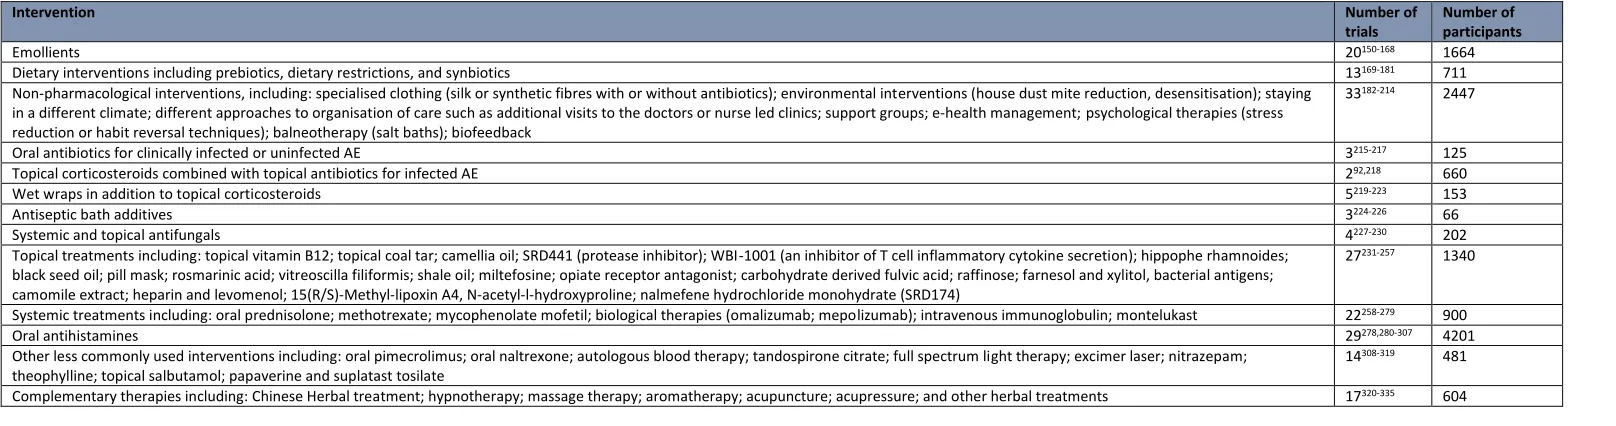 Table 3: Treatments which require more research